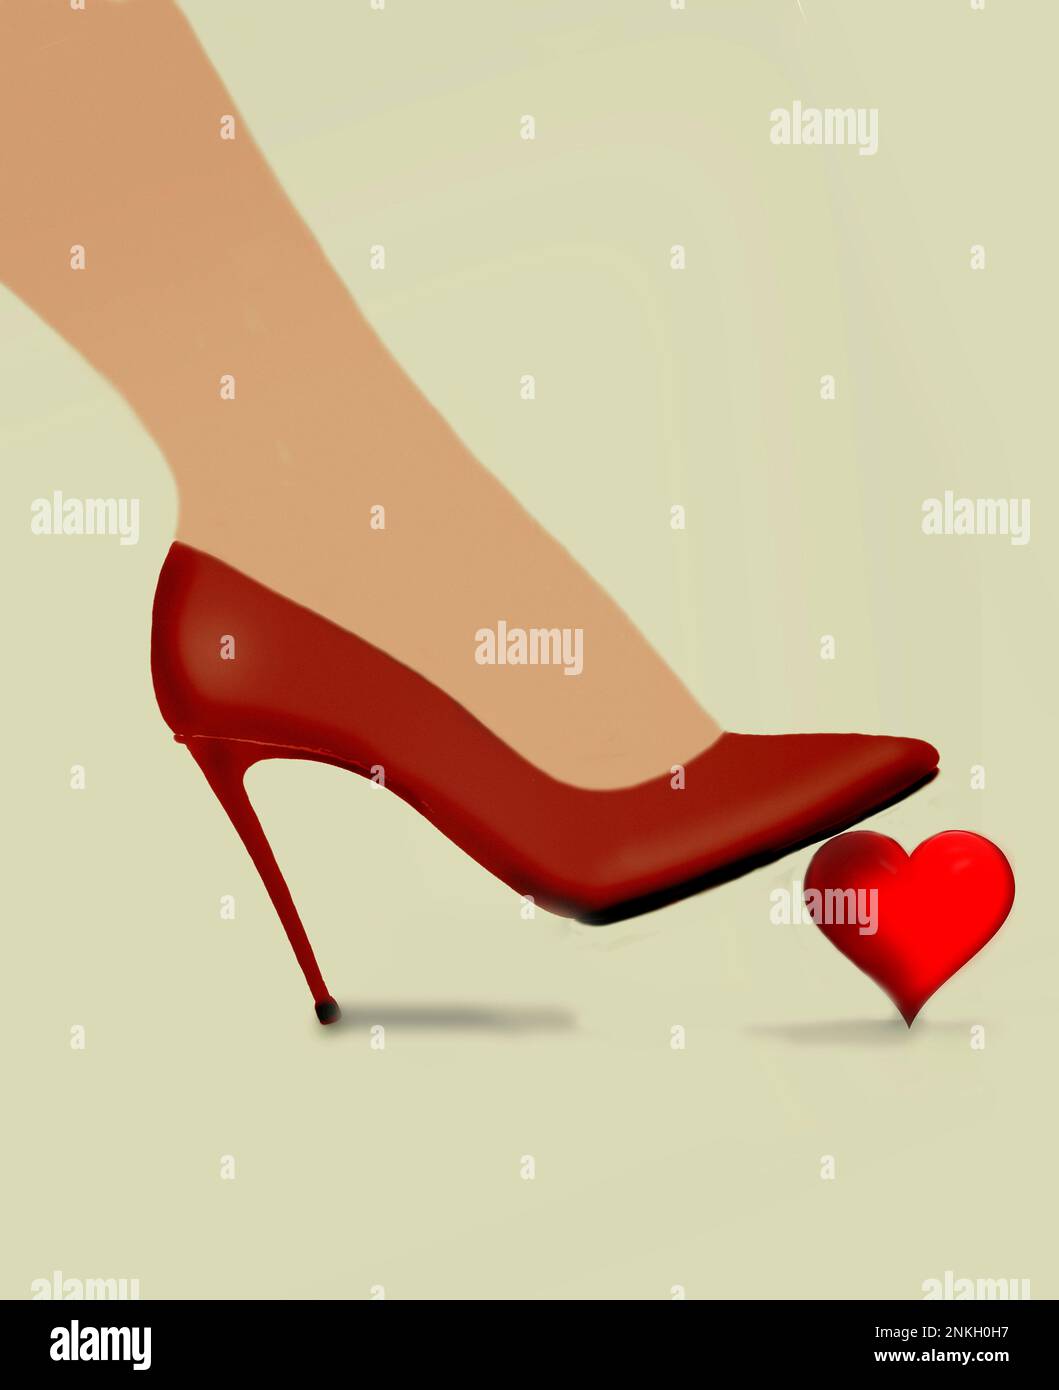 Foot of woman wearing red heels stomping on heart Stock Photo